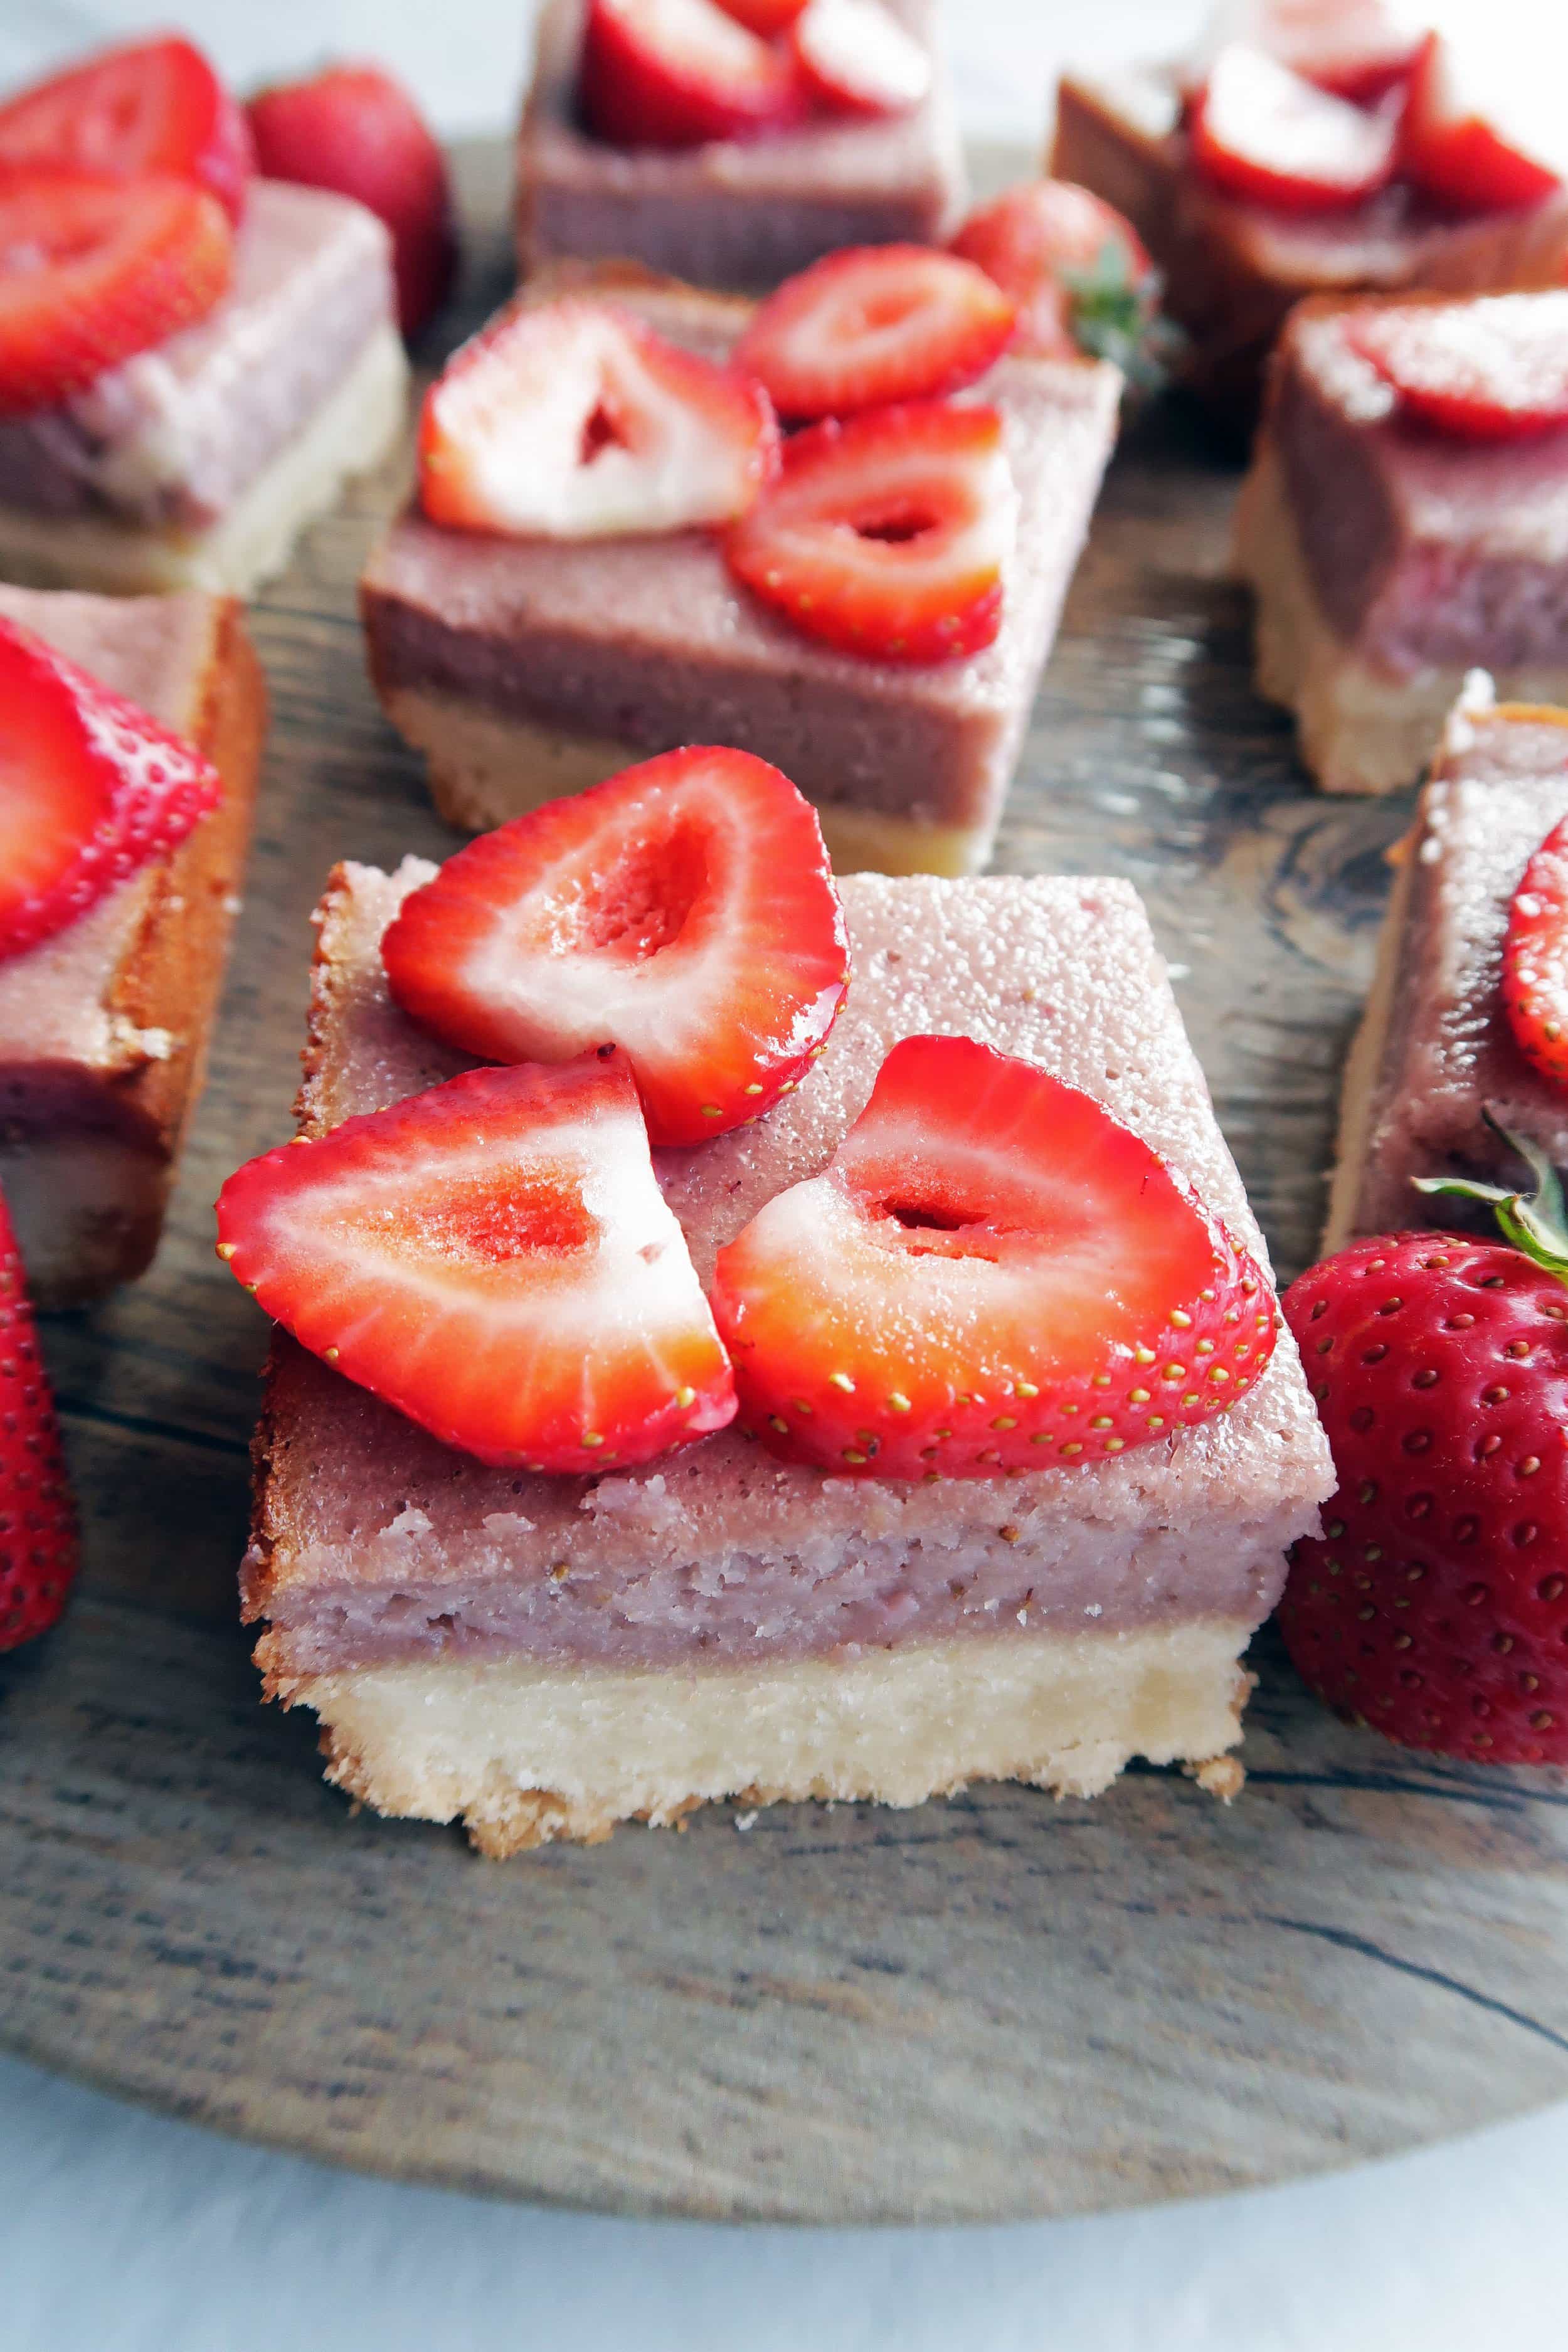 Closeup side angled view of a strawberry shortbread bar with strawberry slices on top -more in the background.